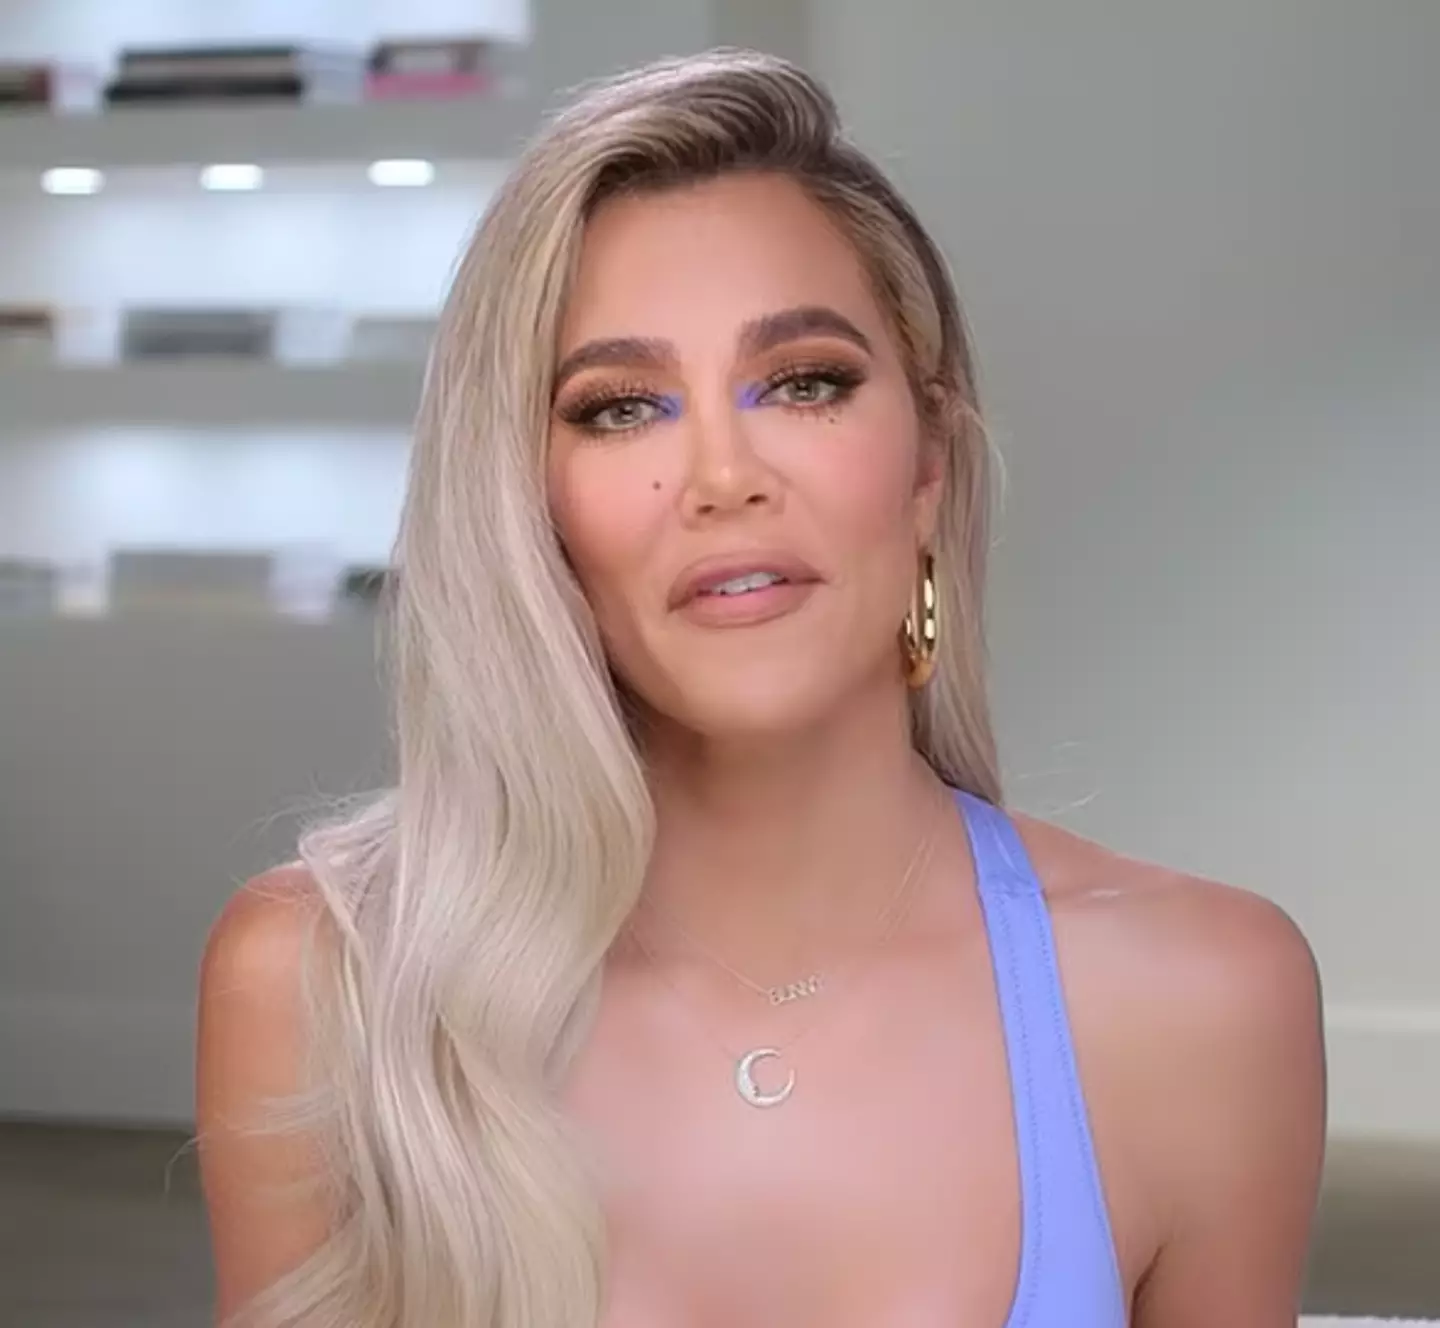 Khloé discussed her relationship during an episode of The Kardashians.